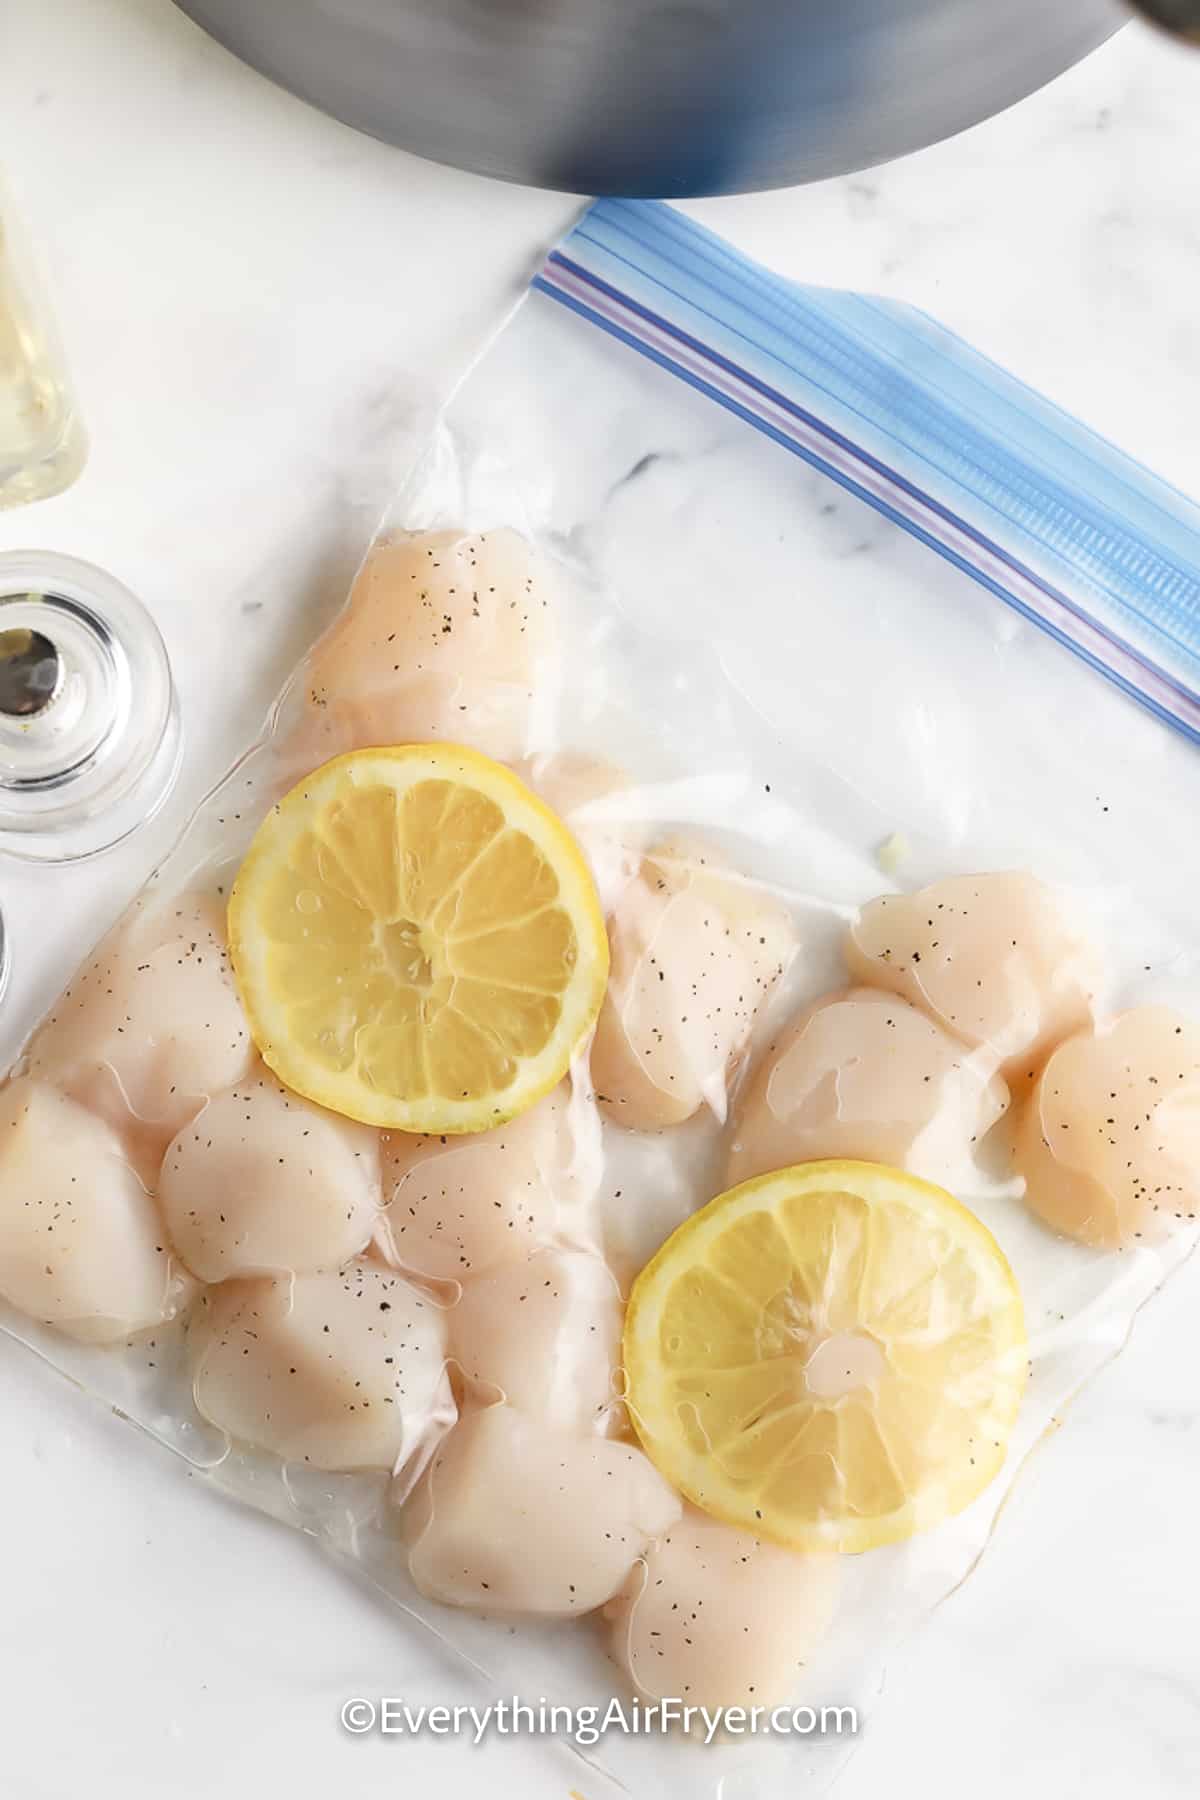 Sous Vide Scallops in a zippered bag with lemon slices